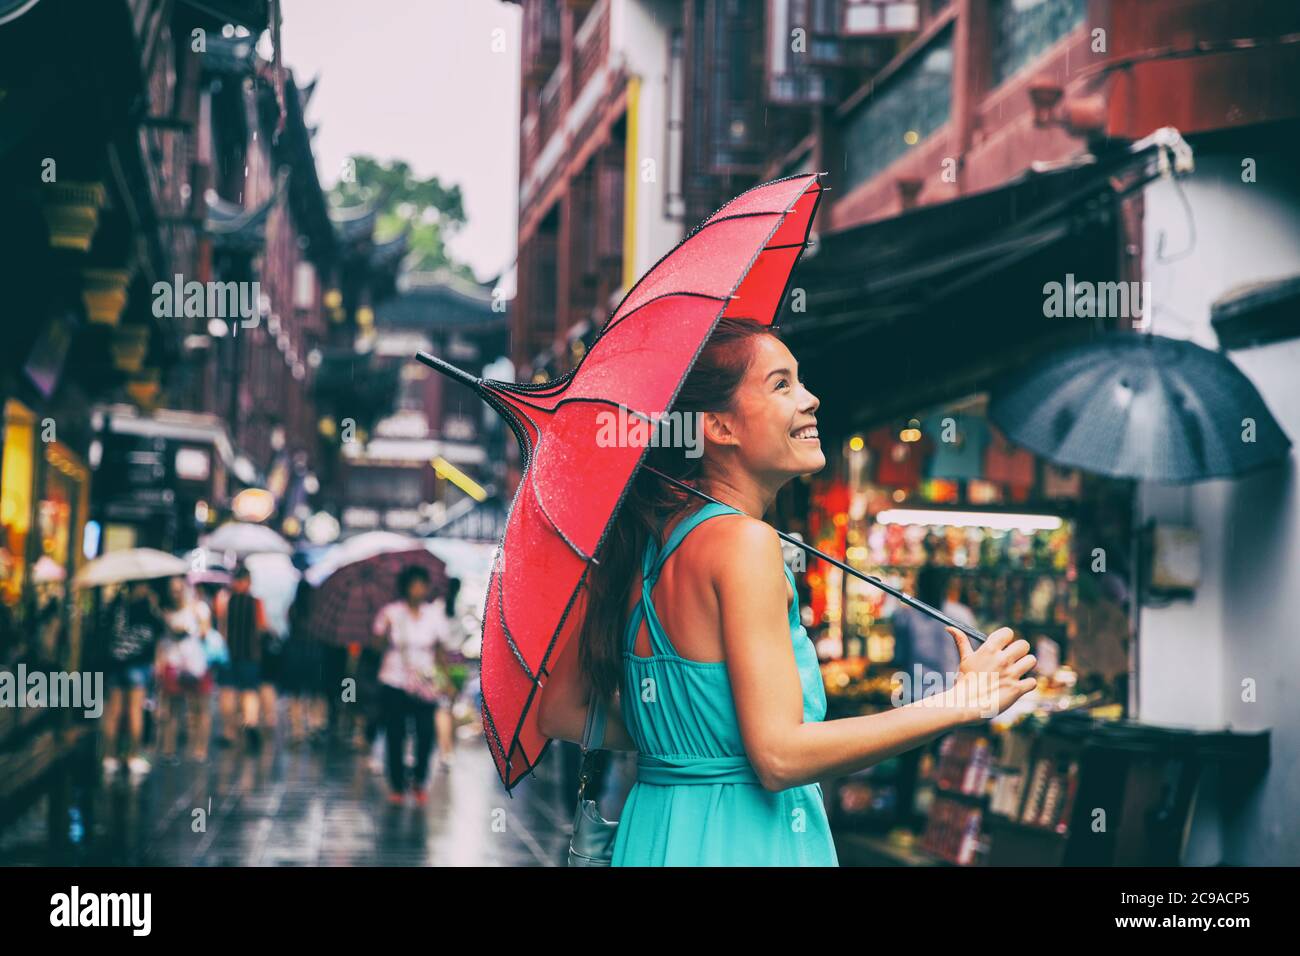 People lifestyle umbrella travel Asian woman shopping in chinatown market street. Rainy day girl tourist under red oriental umbrella in back alleys in Stock Photo